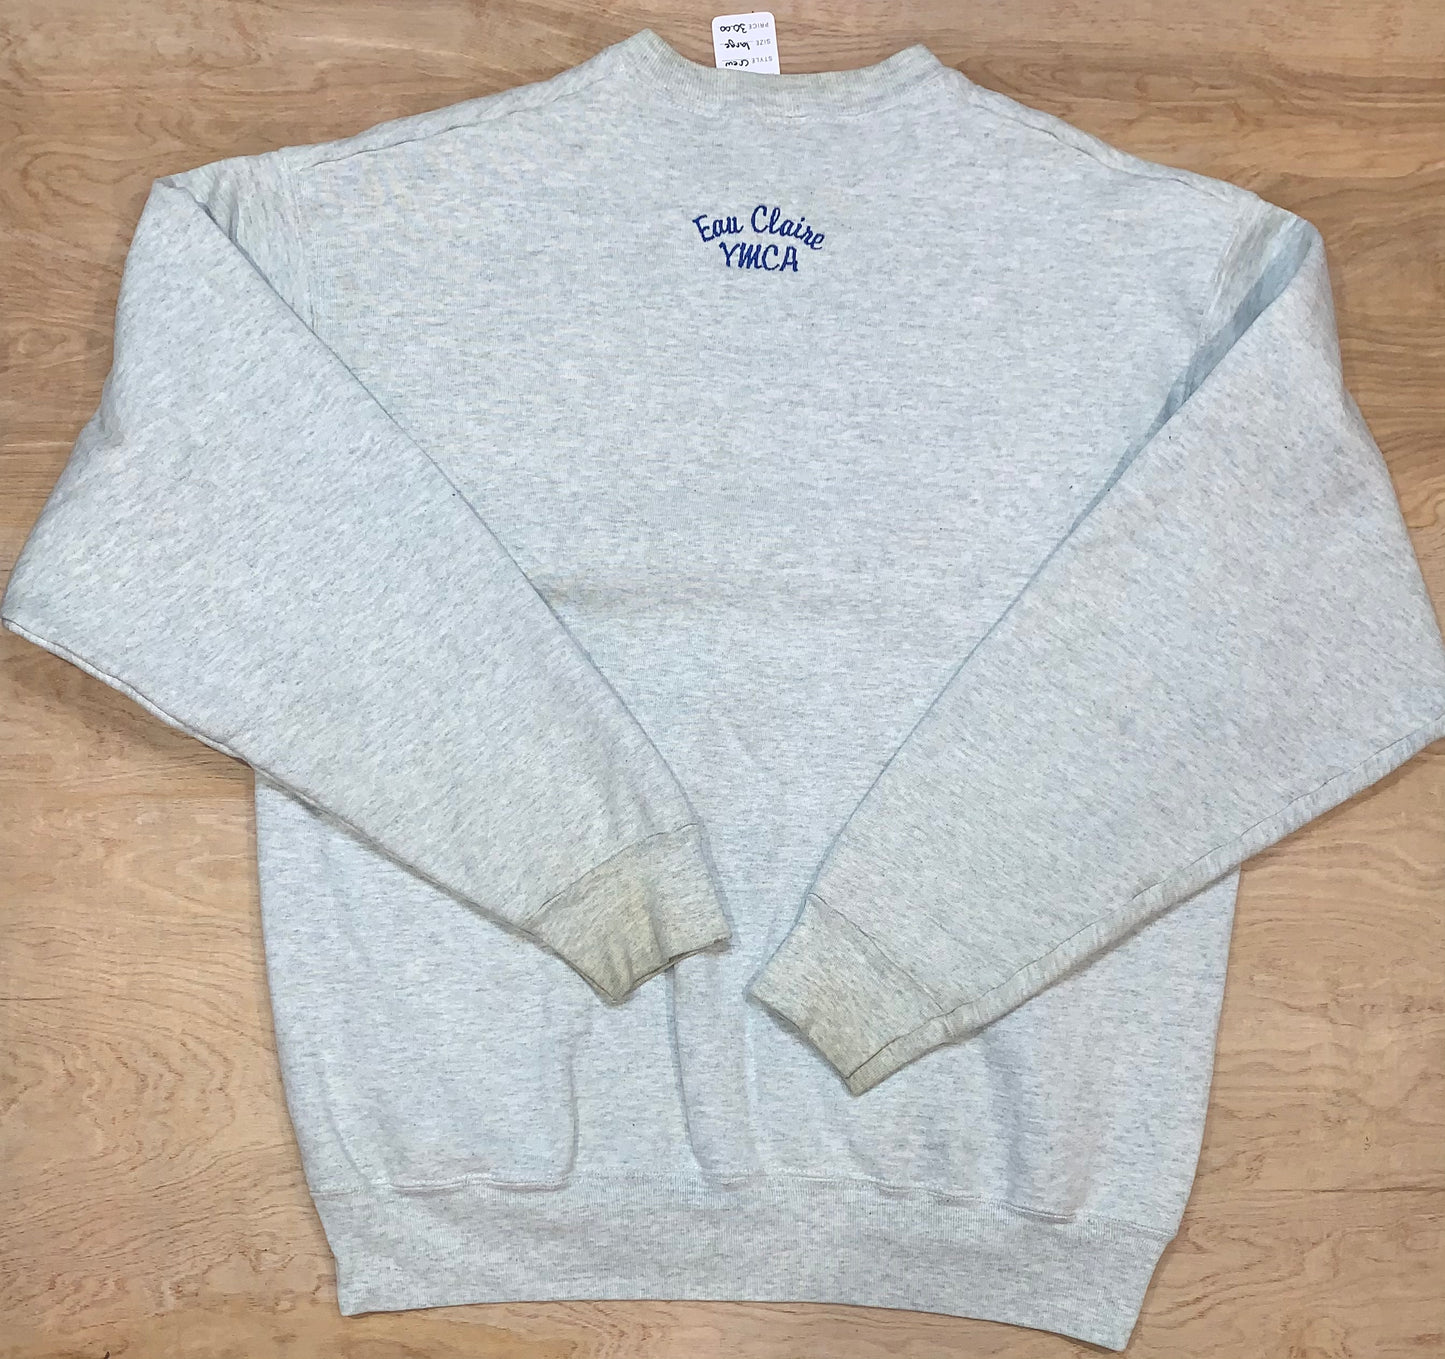 Classic YMCA Camp Manitou Embroidered Crewneck